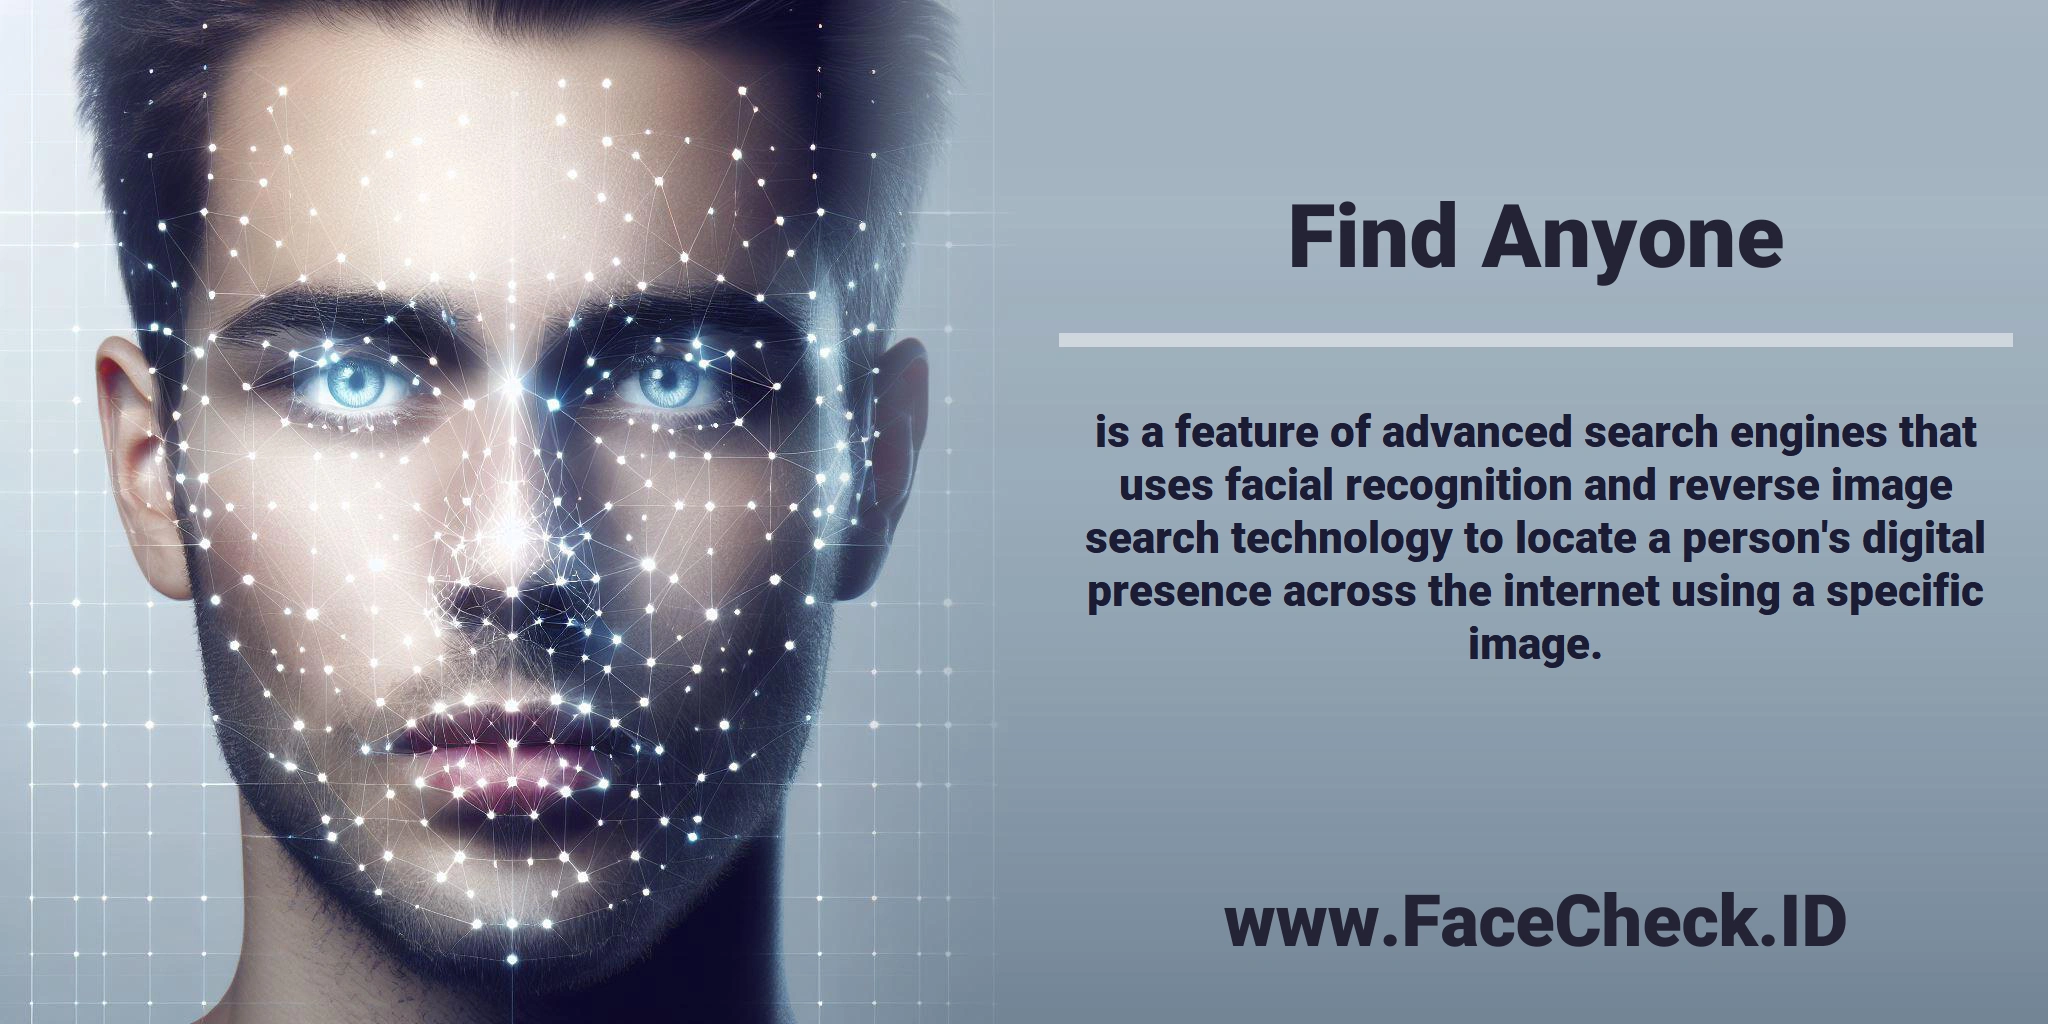 <b>Find Anyone</b> is a feature of advanced search engines that uses facial recognition and reverse image search technology to locate a person's digital presence across the internet using a specific image.